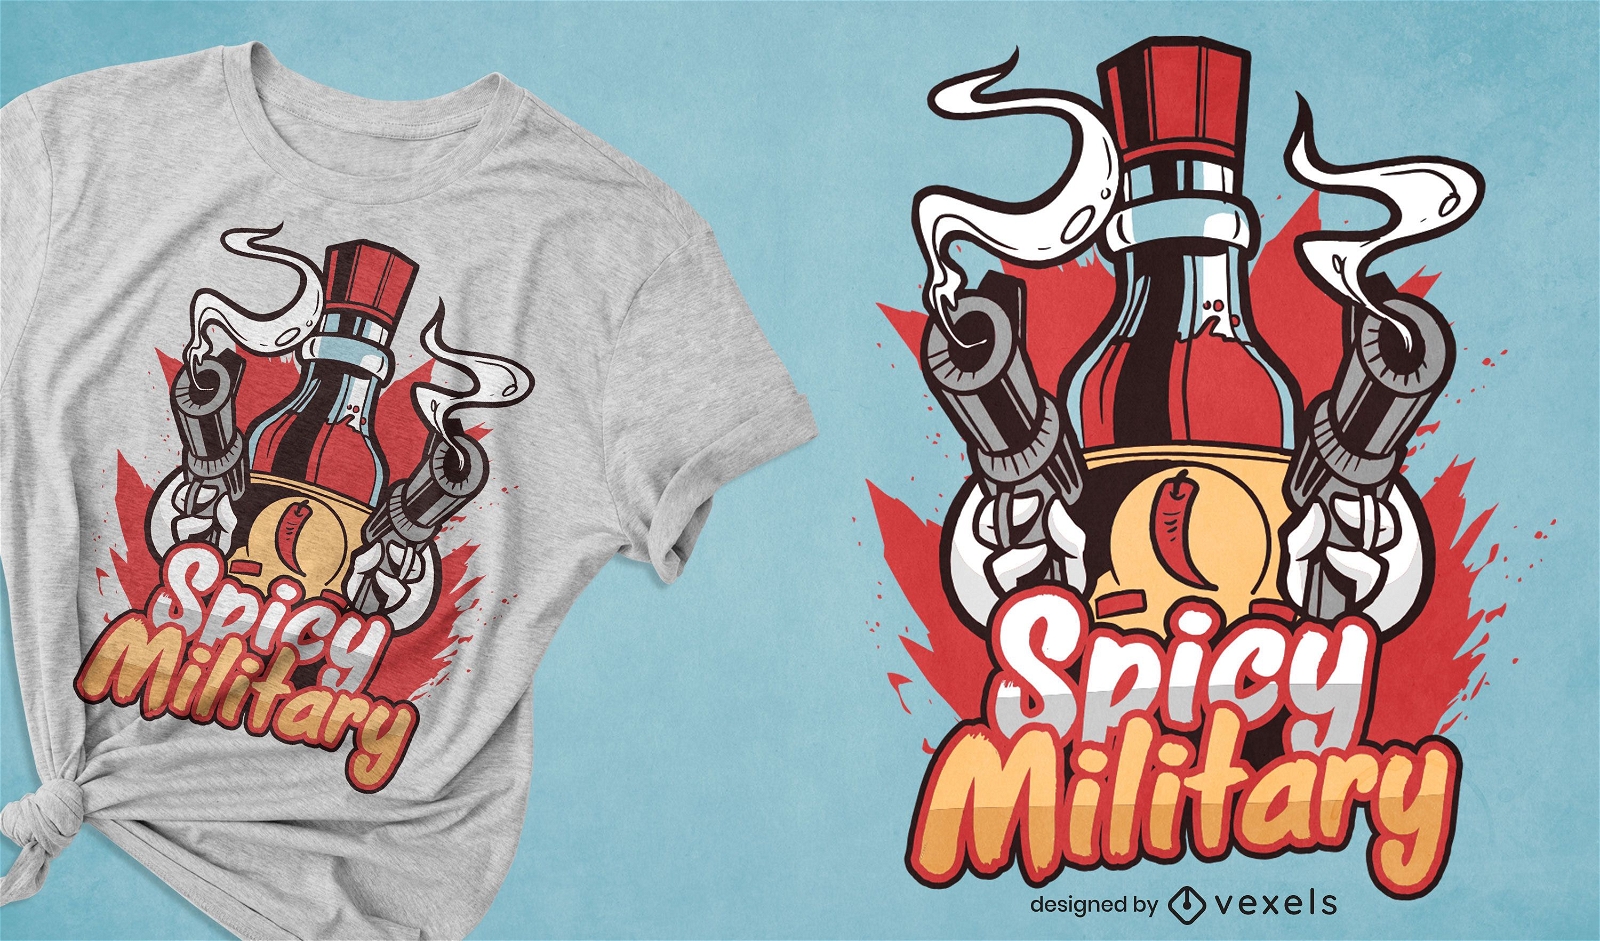 Hot sauce with guns quote t-shirt design